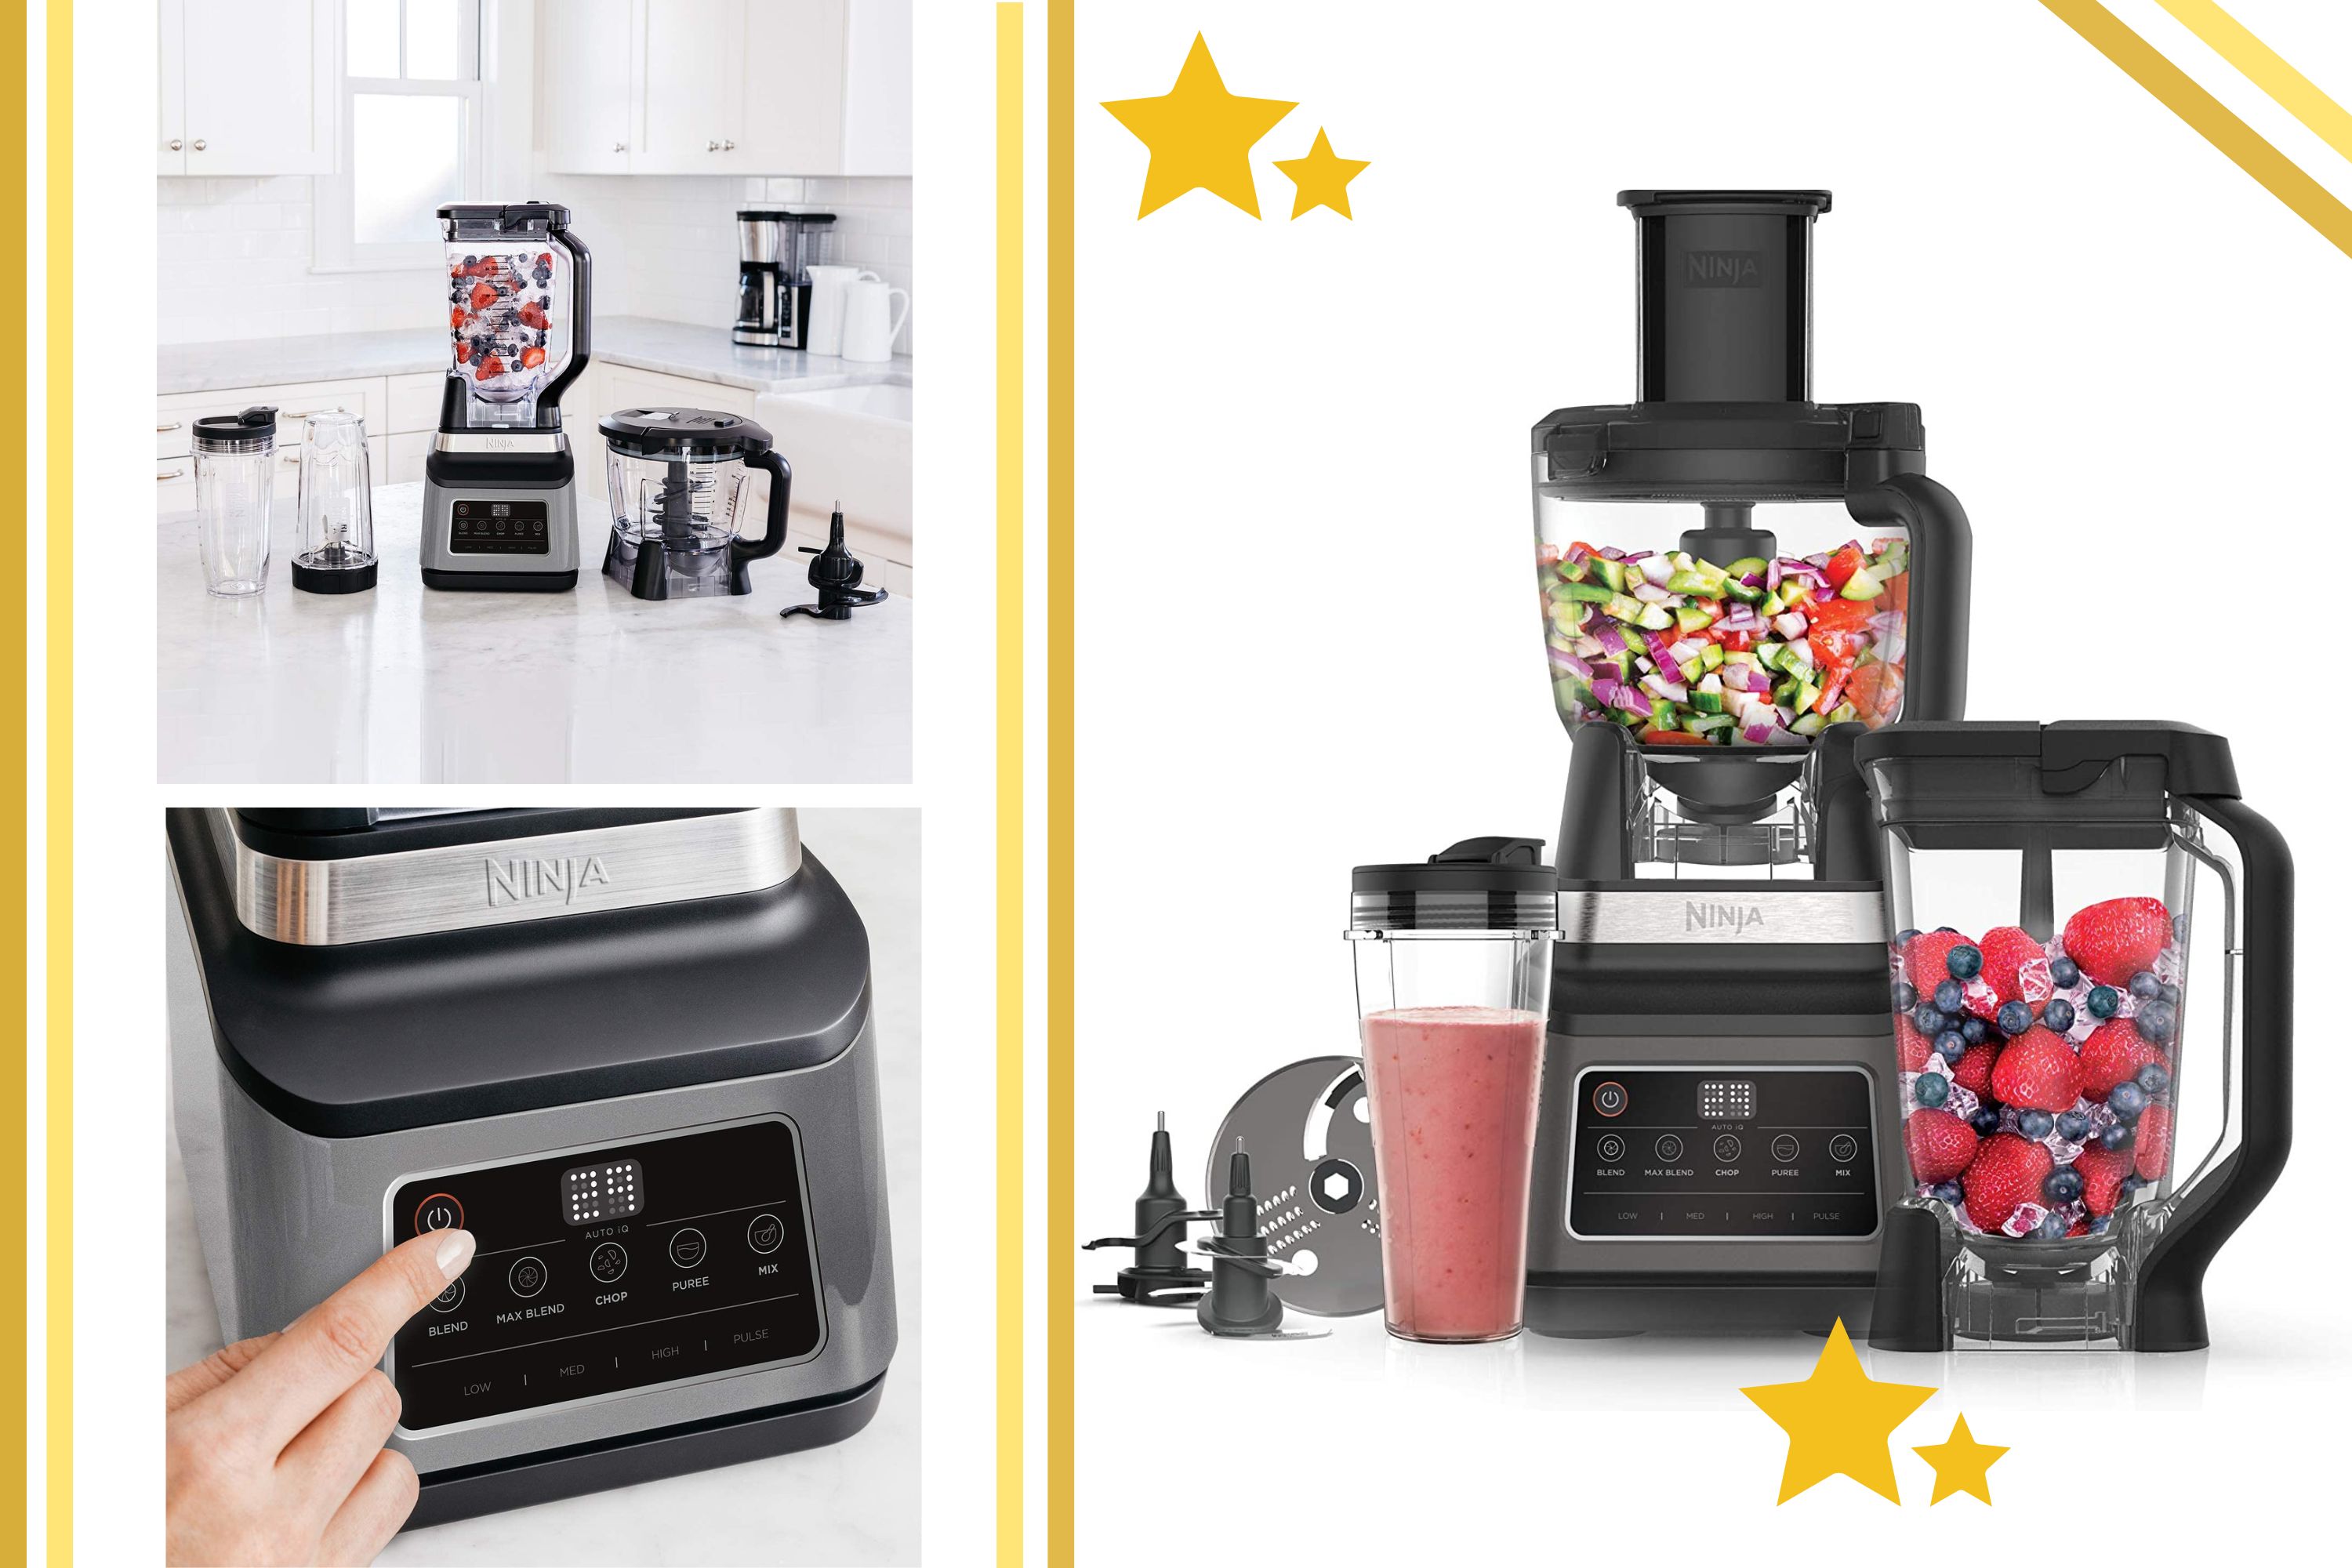 Save 30% on the Ninja 3-in-1 Food Processor and Blender on